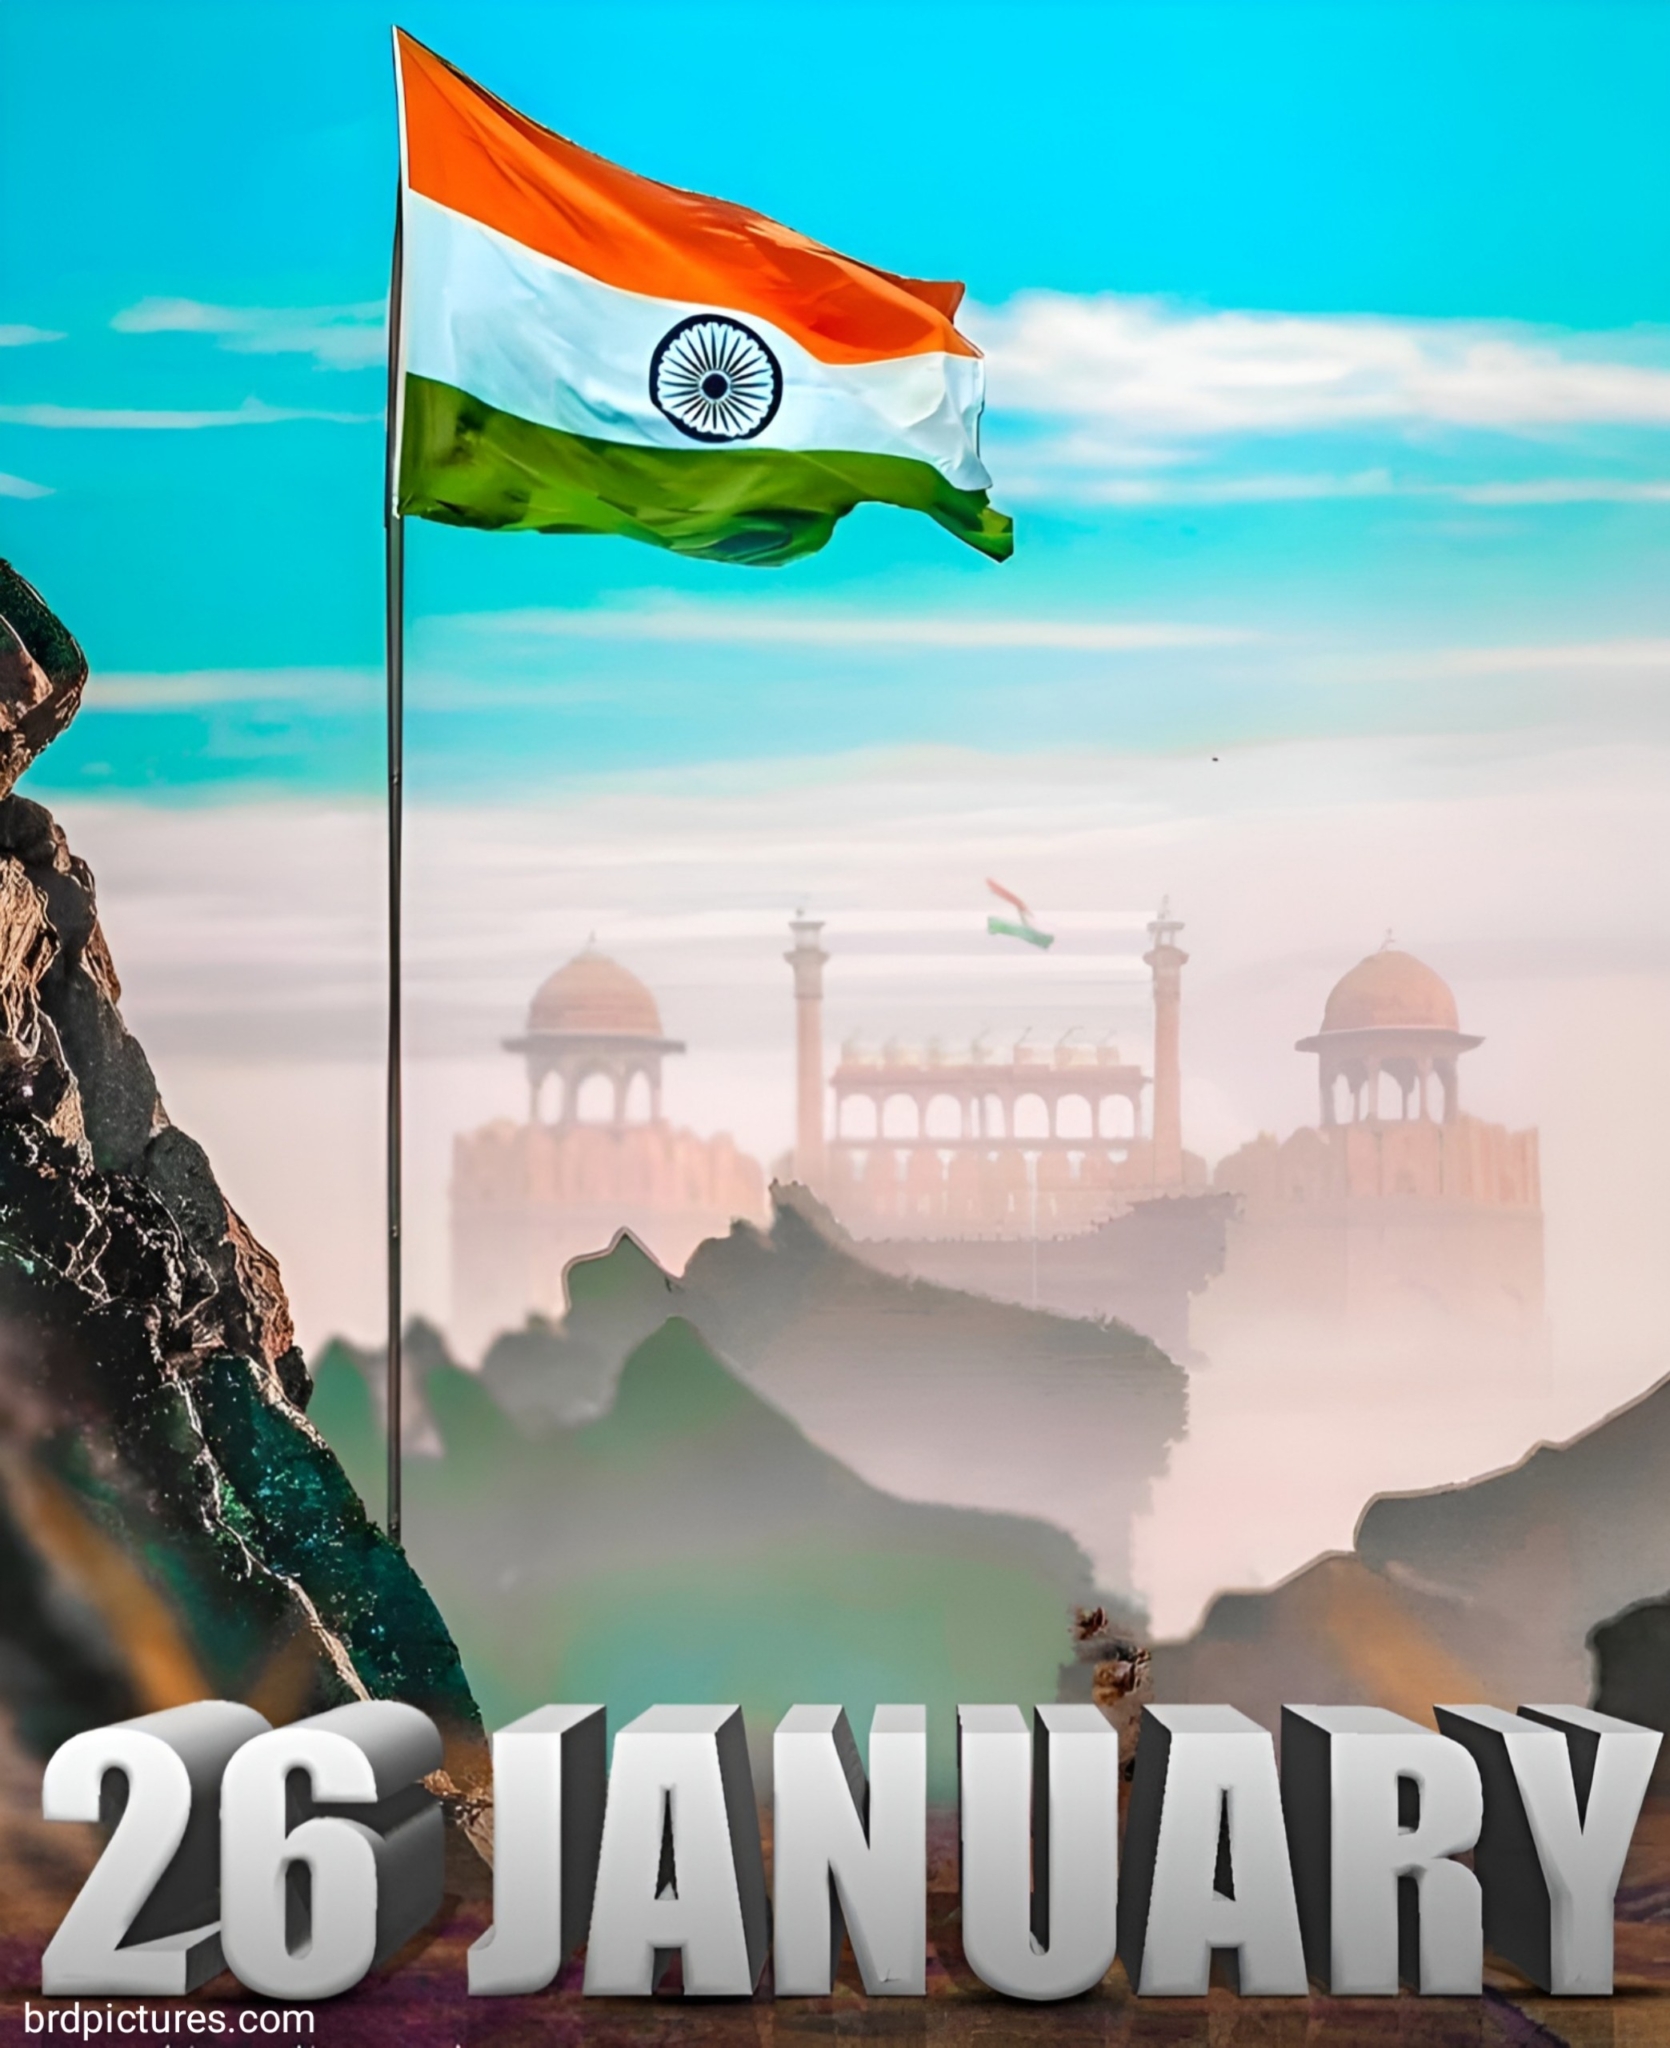 Beautiful Indian Flag Background Wallpaper 4k For 26 January